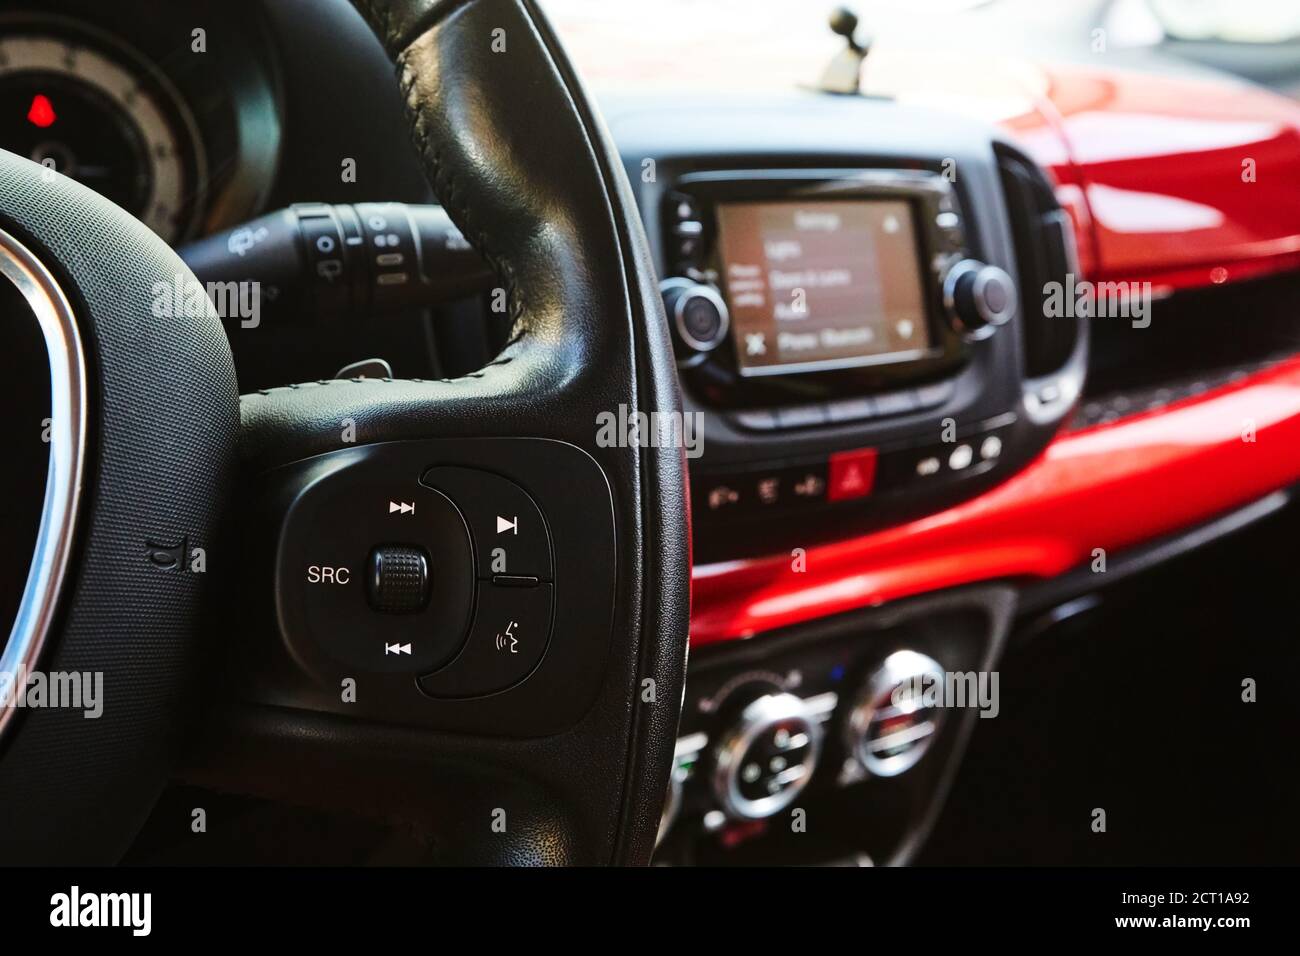 Audio system and Voice dialing control buttons on steering wheel. Car interior. Shallow dof Stock Photo